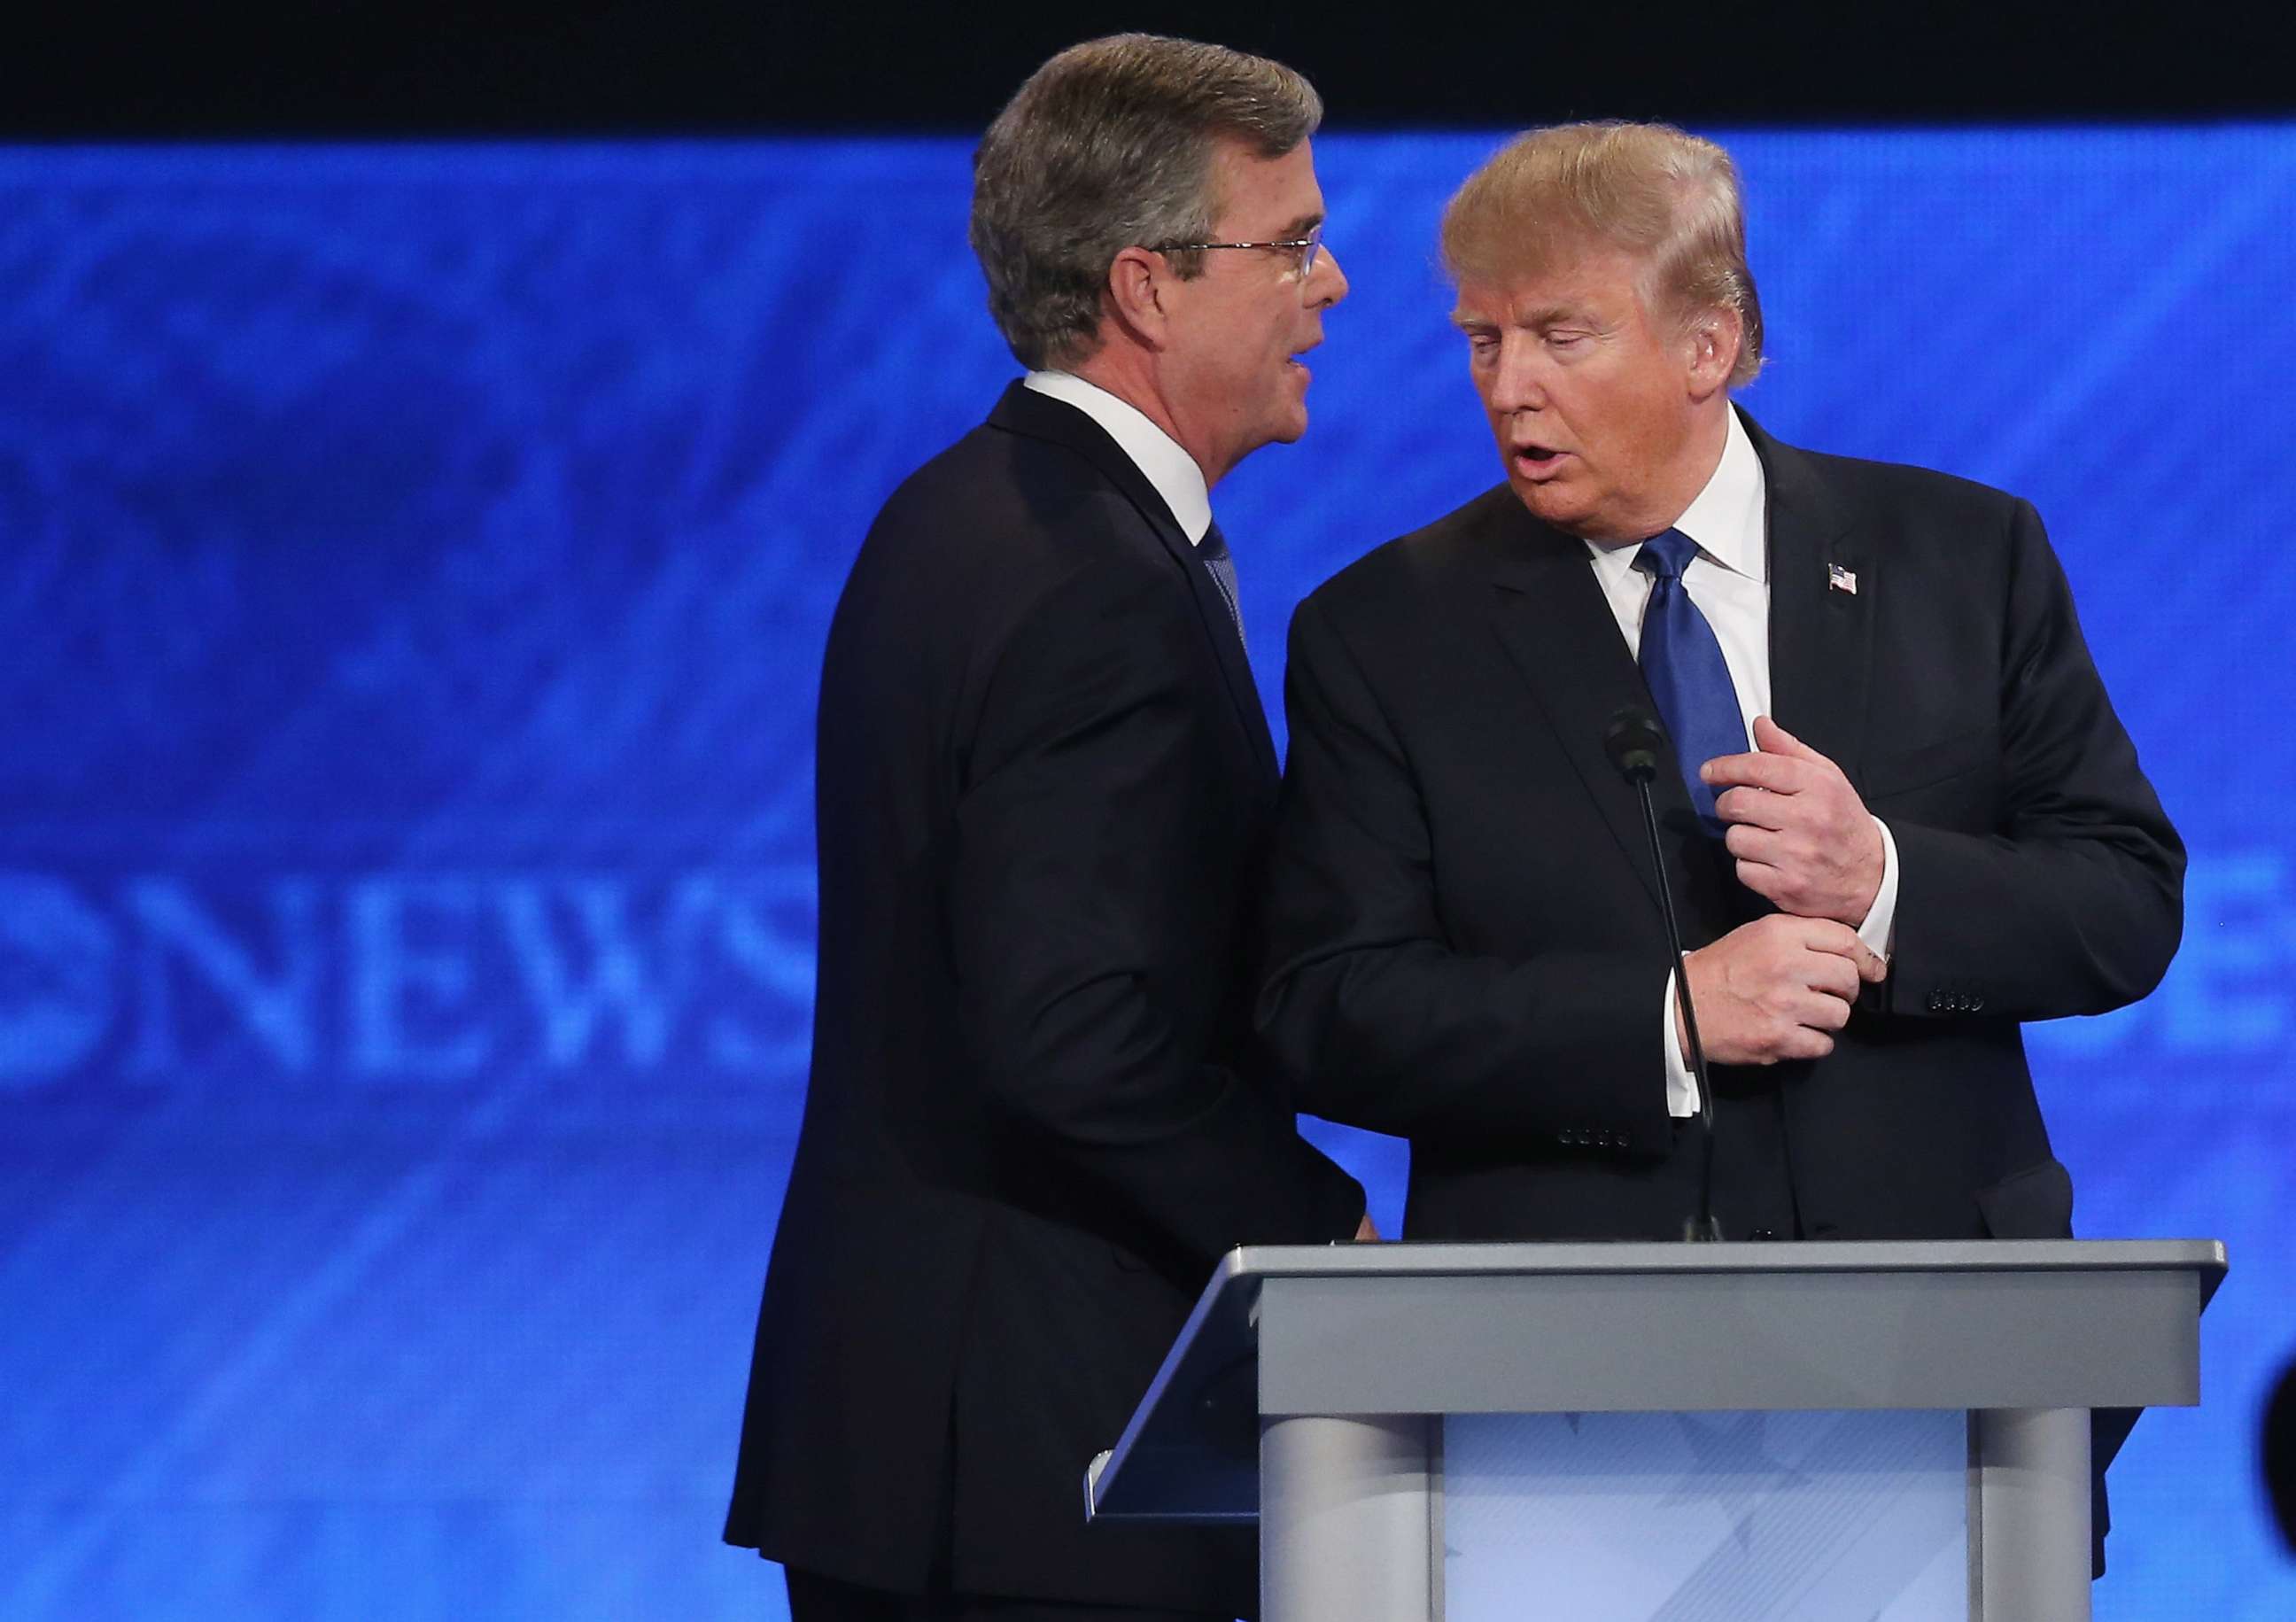 PHOTO: In this February 6, 2016 file photo Republican presidential candidates Jeb Bush and Donald Trump talk following the Republican presidential debate at St. Anselm College in Manchester, N.H.